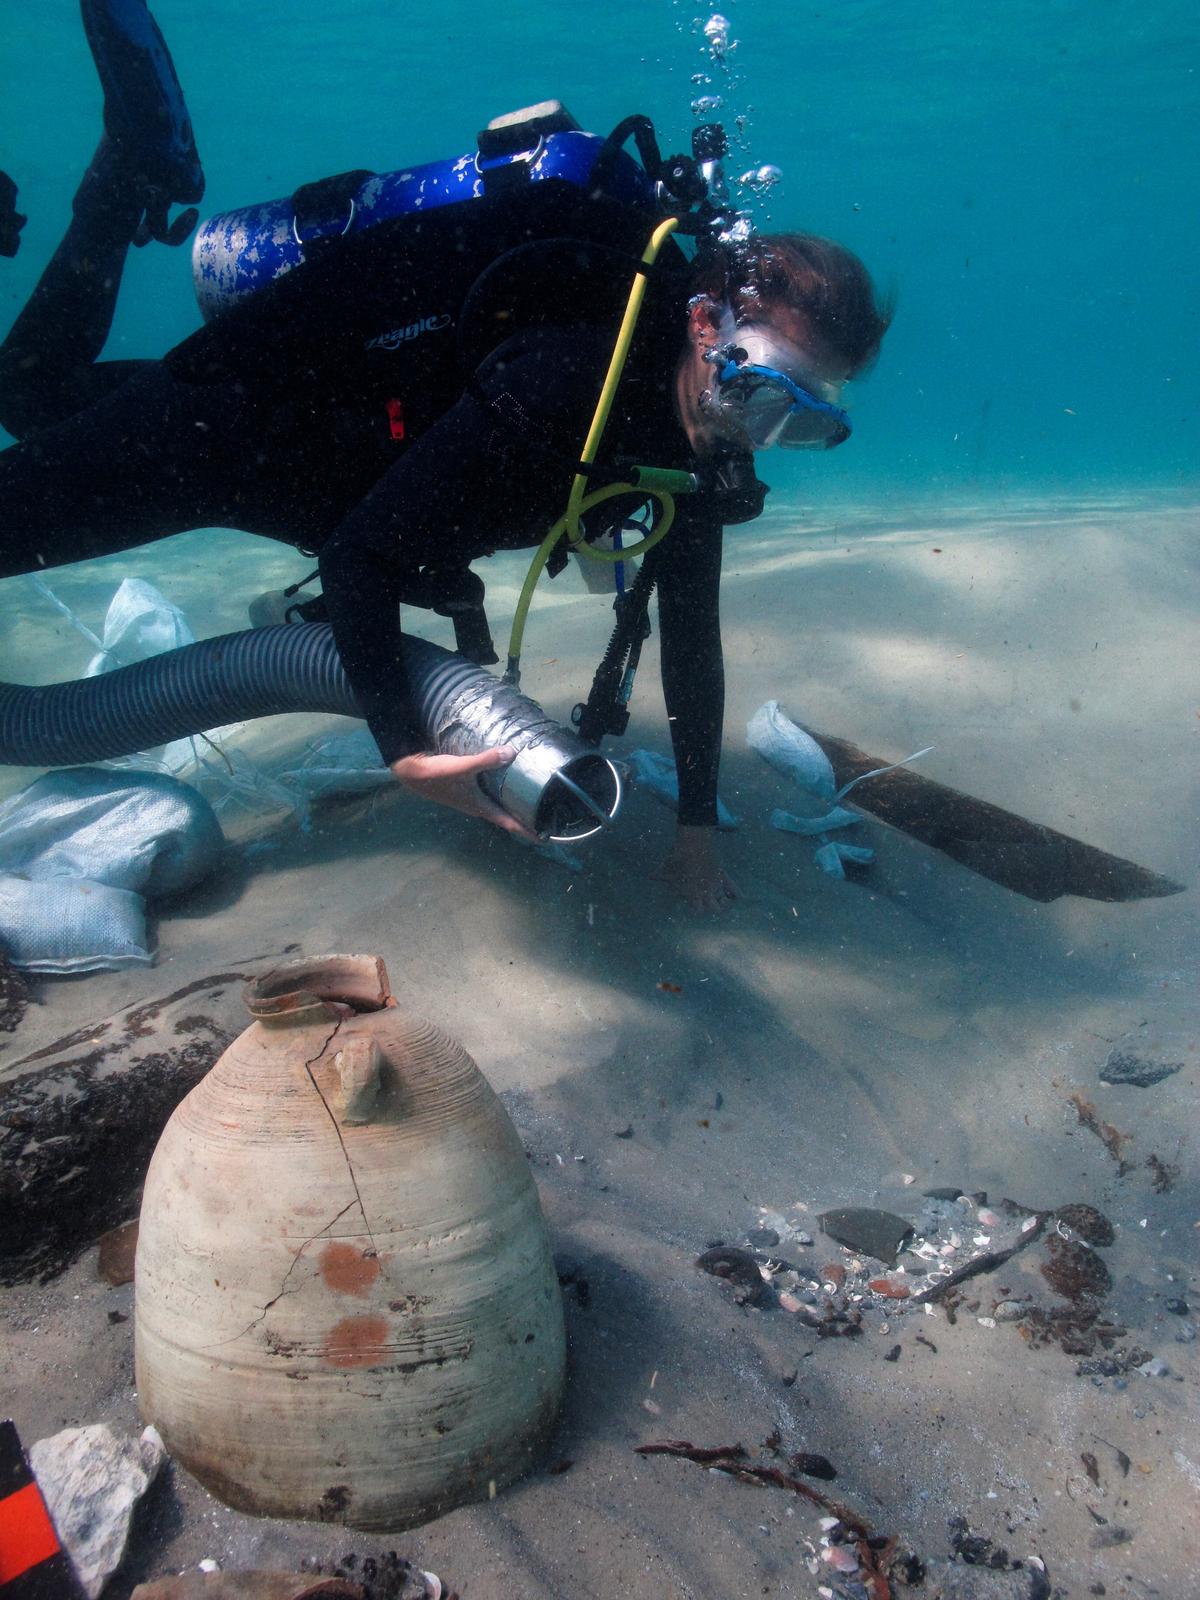 A diver excavates the remains of the wreck's antiquated cargo. (Reuters/Amir Yurman)